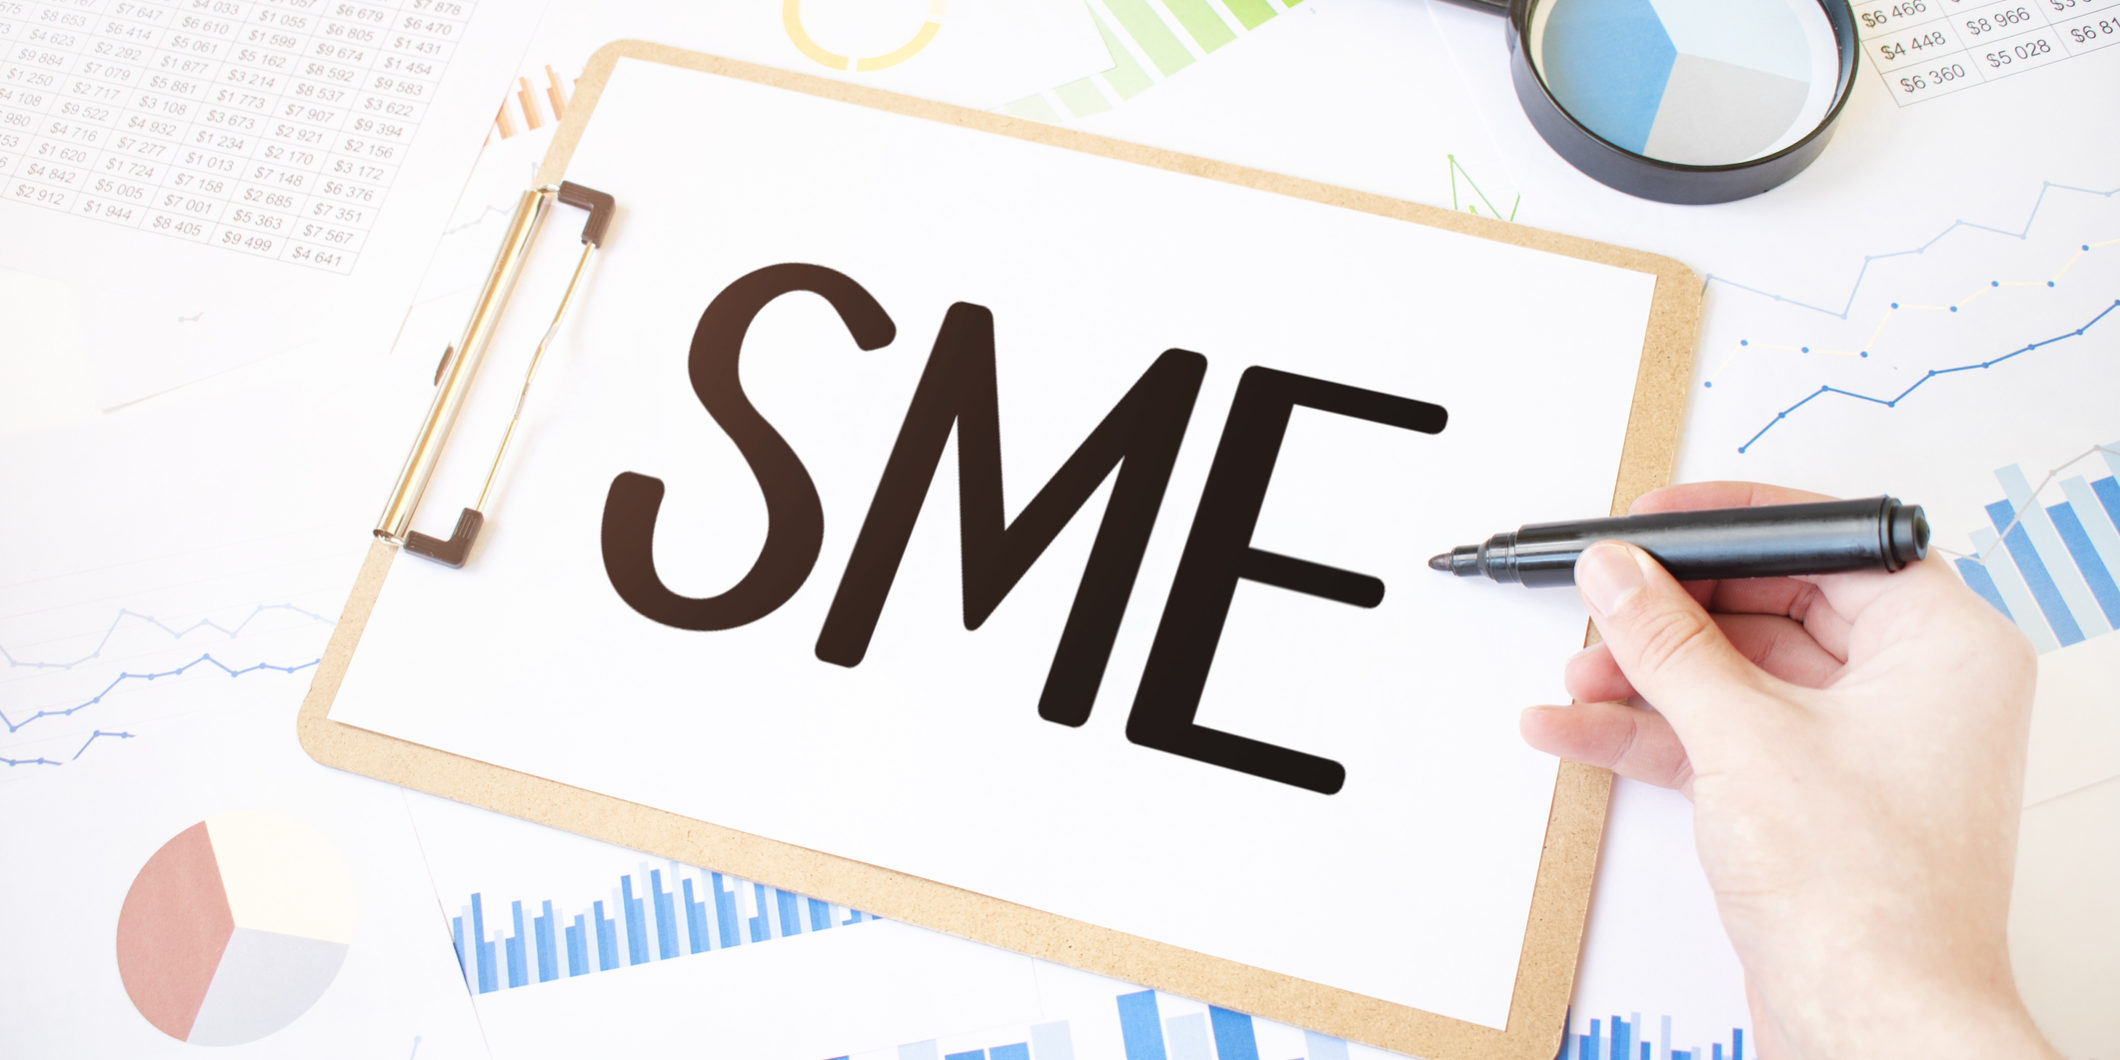 SME Meaning | The Solution for the Flawed SME Definition